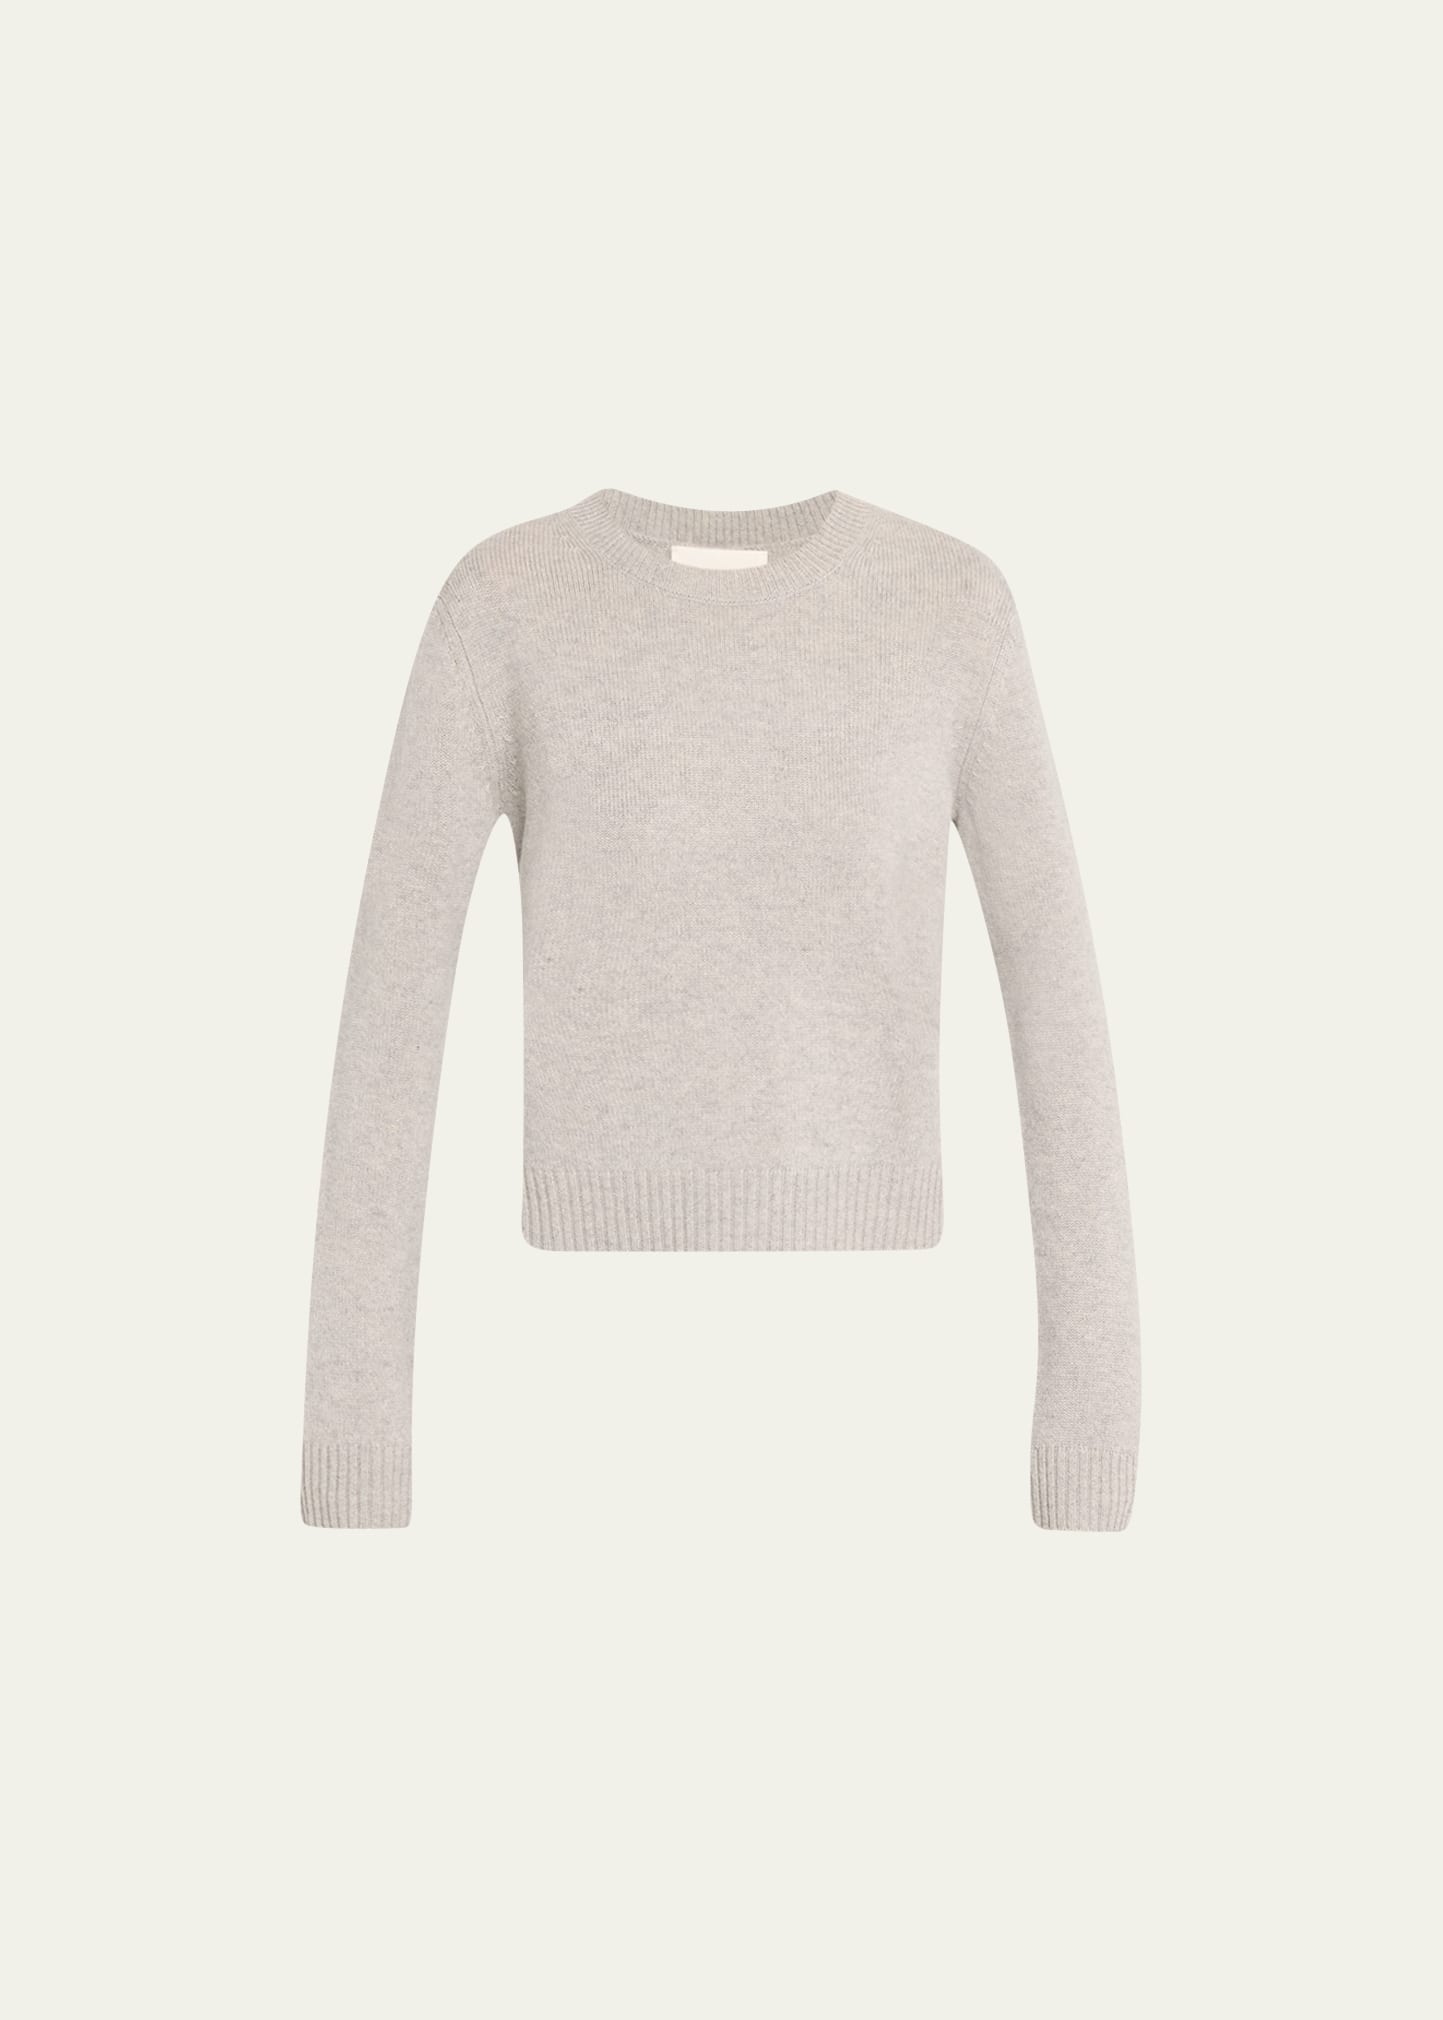 The Mable Cashmere Cropped Sweater